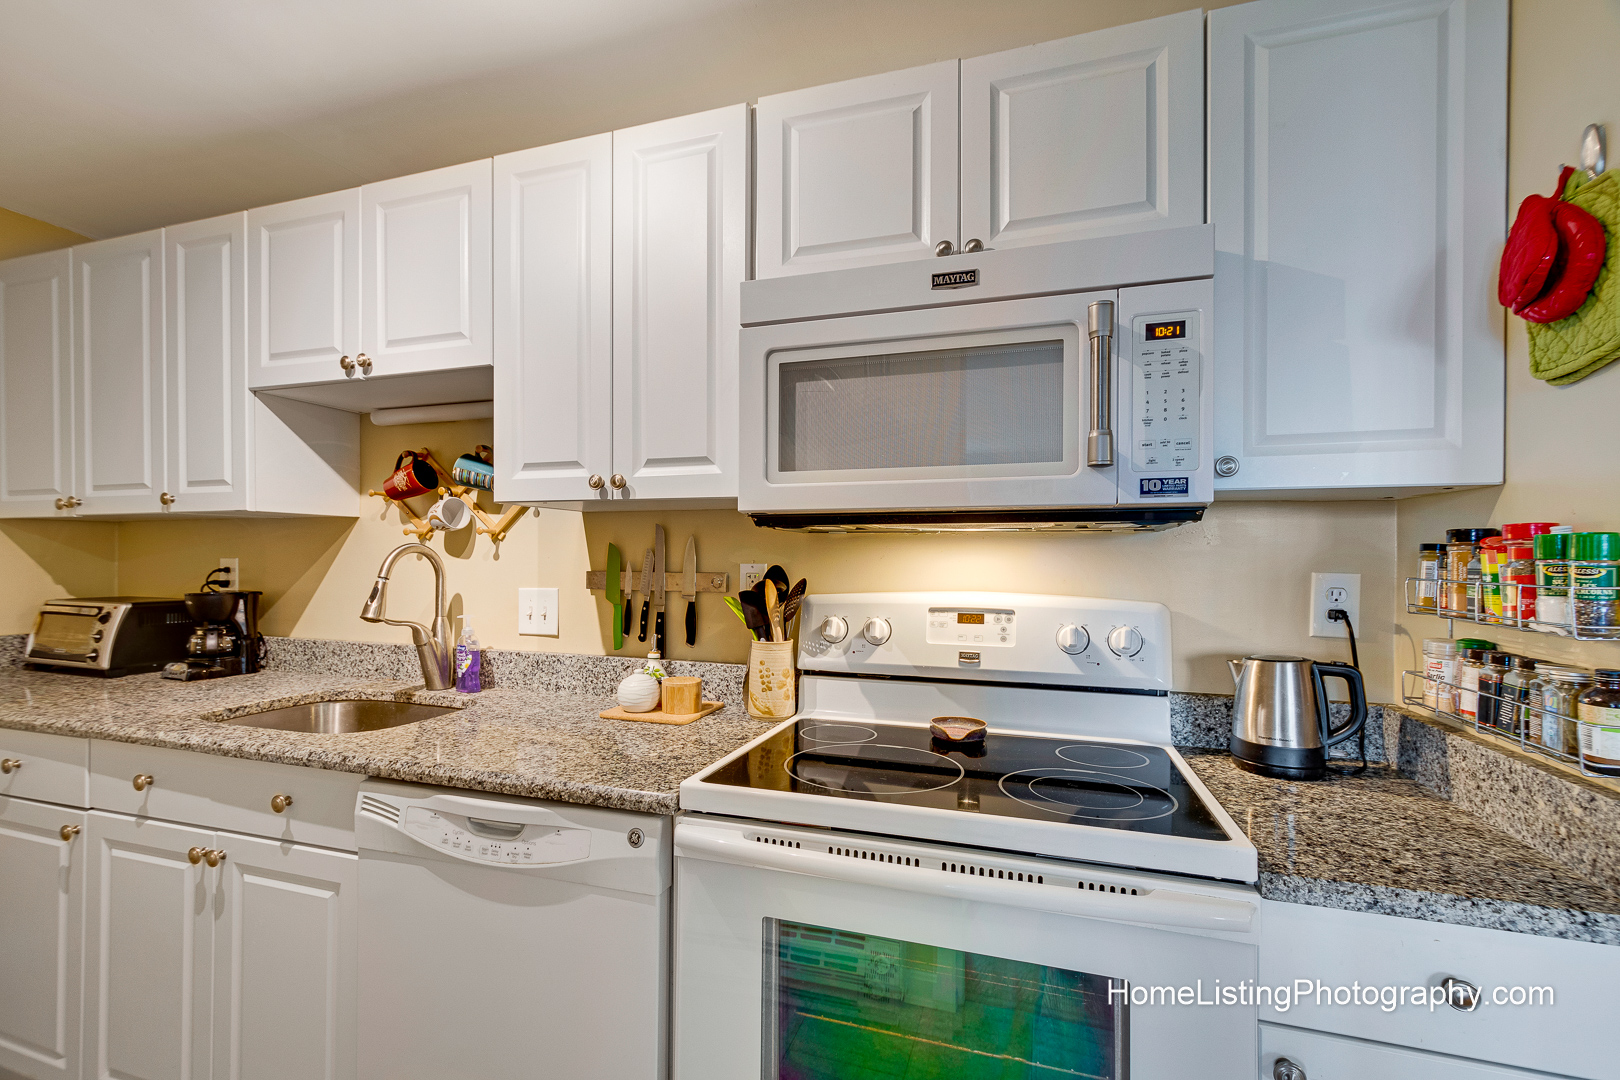 Thomas Adach - Somerbille MA professional real estate photographer - 508-655-2225 Home Listing Photography